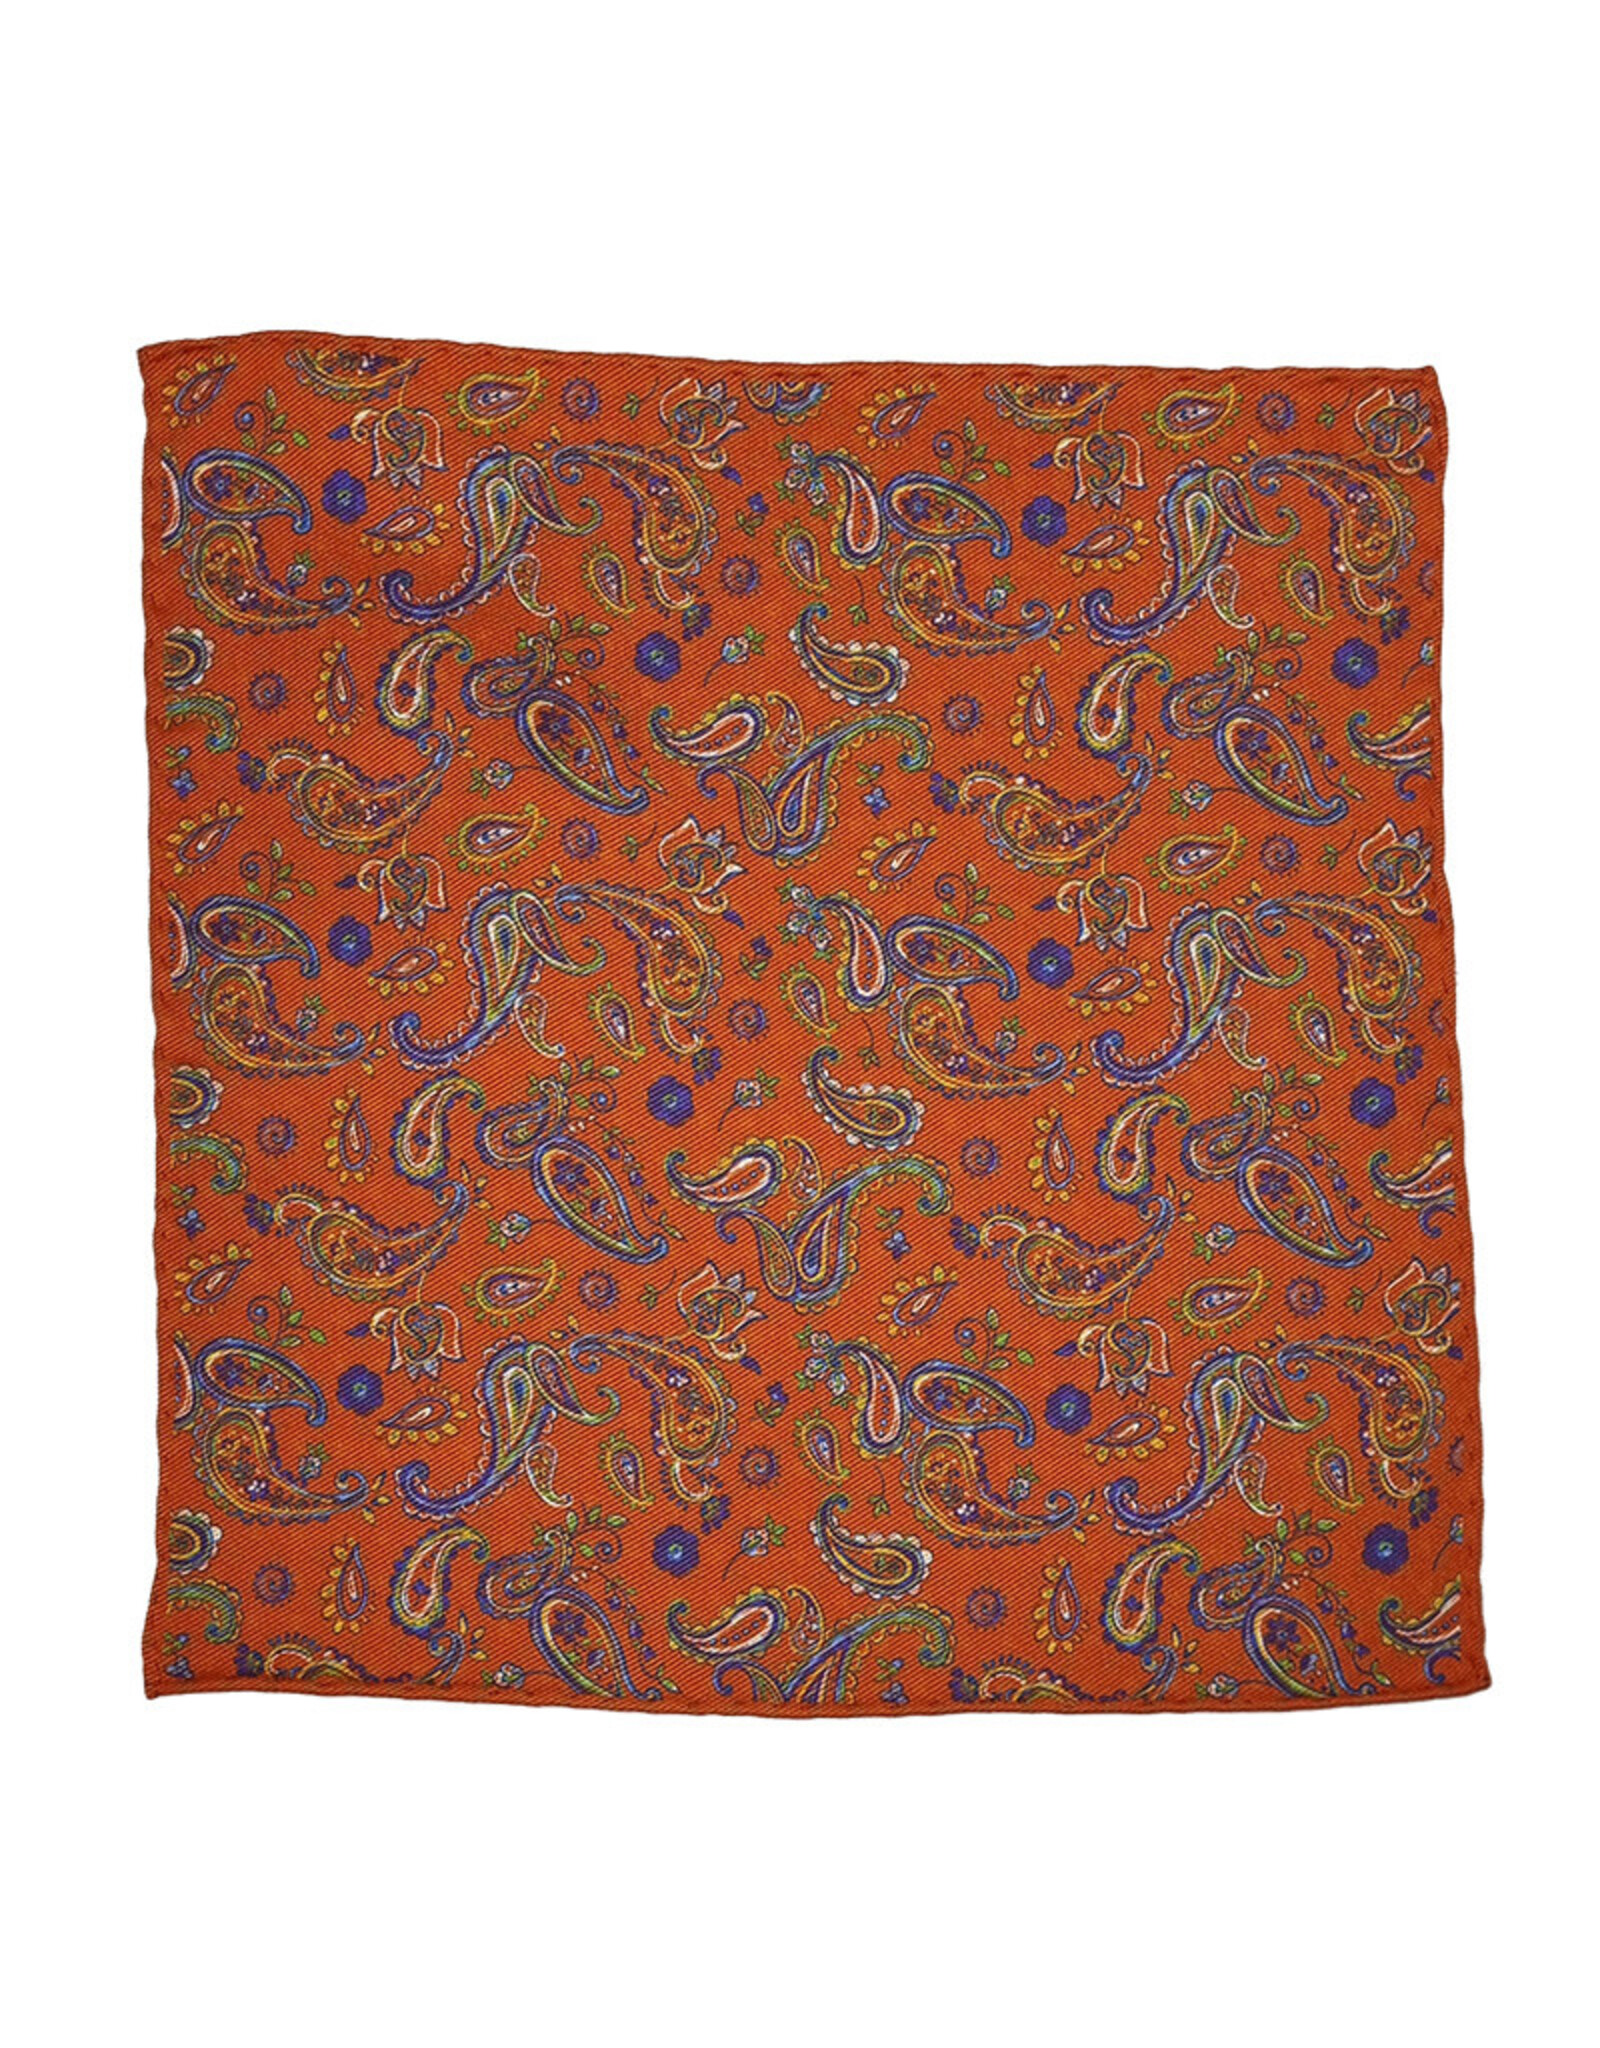 Calabrese Calabrese pocket square paisley orange 8024014/016